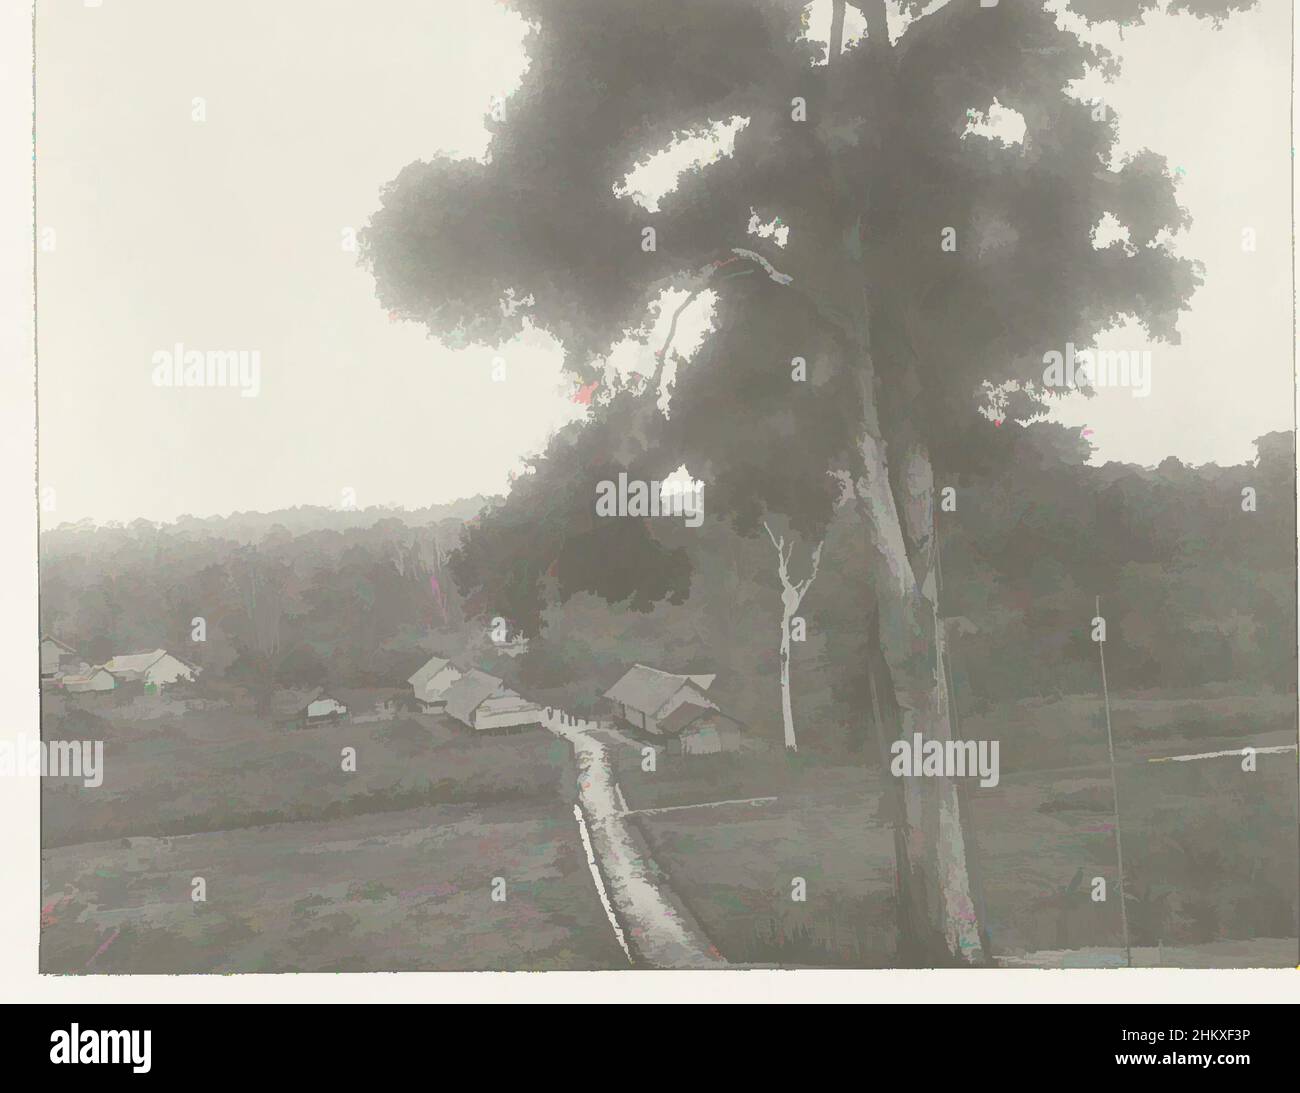 Art inspired by Houses on a road, View from a hill of a group of houses located on a road, in the foreground a large tree. Photo in the photo album on oil extraction in Borneo by the Royal Dutch Petroleum Company (KNPM) in the years 1903-1907., Kalimantan, 1903 - 1907, paper, gelatin, Classic works modernized by Artotop with a splash of modernity. Shapes, color and value, eye-catching visual impact on art. Emotions through freedom of artworks in a contemporary way. A timeless message pursuing a wildly creative new direction. Artists turning to the digital medium and creating the Artotop NFT Stock Photo